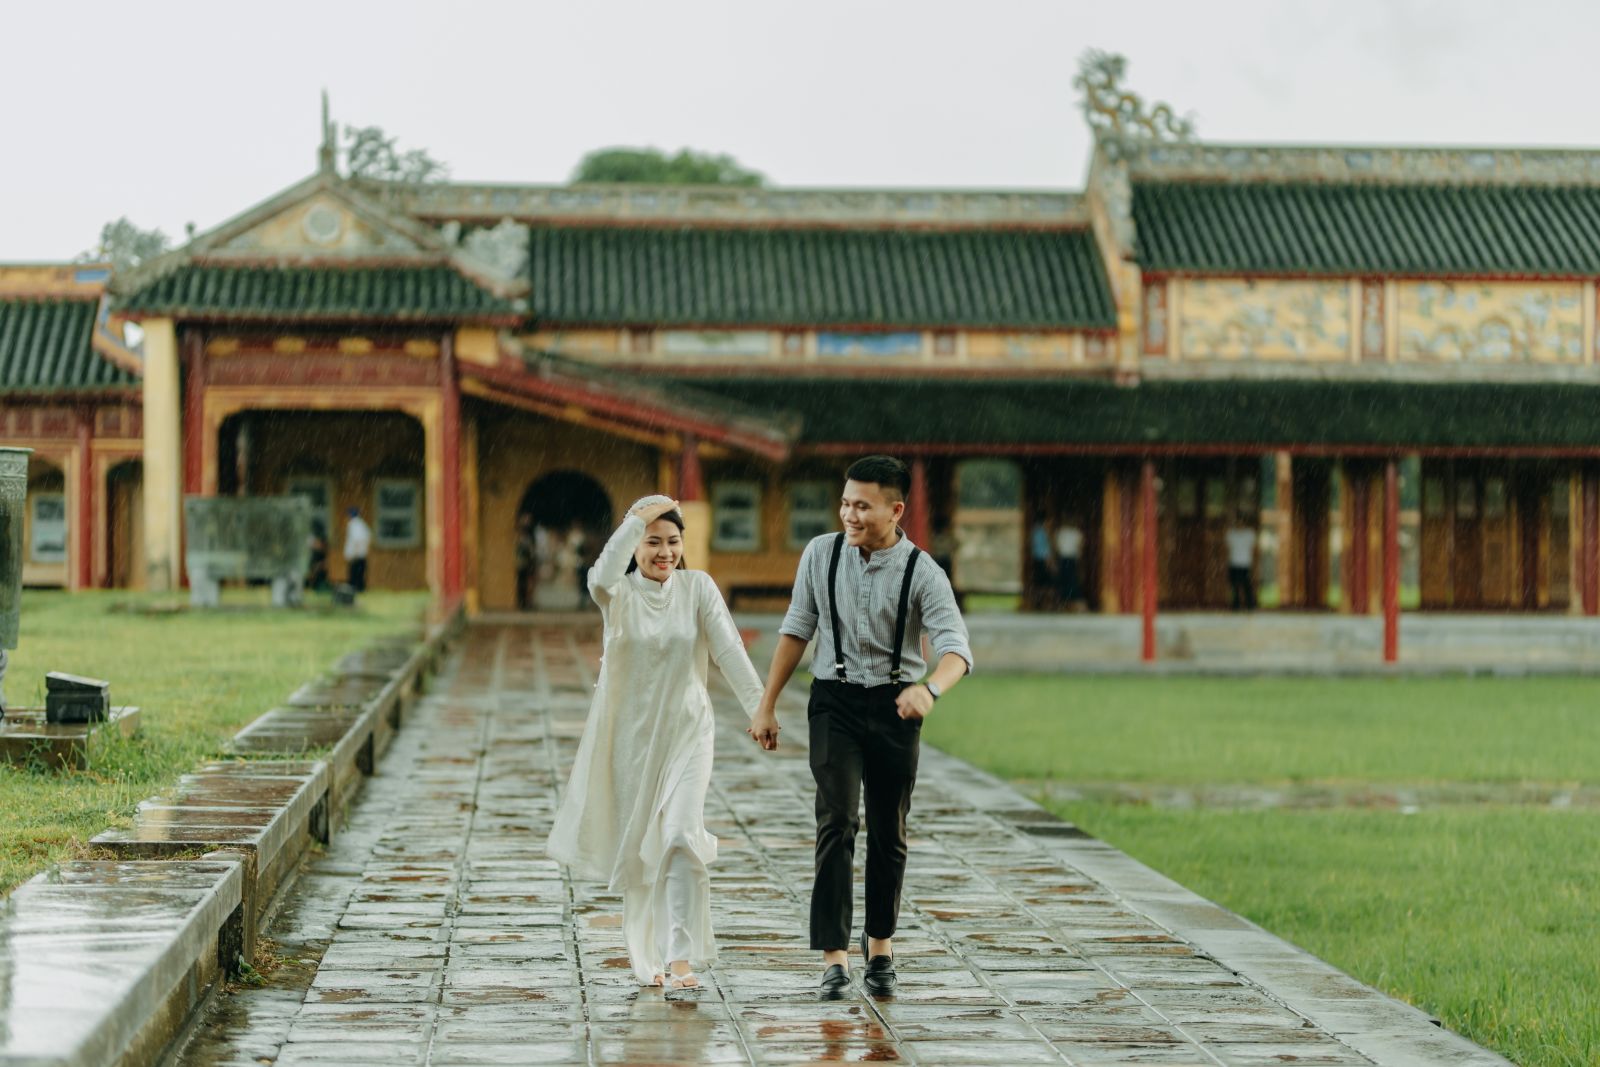 A couple in Hanoi chooses the backdrop of the Imperial Citadel in the rain to take their wedding photos